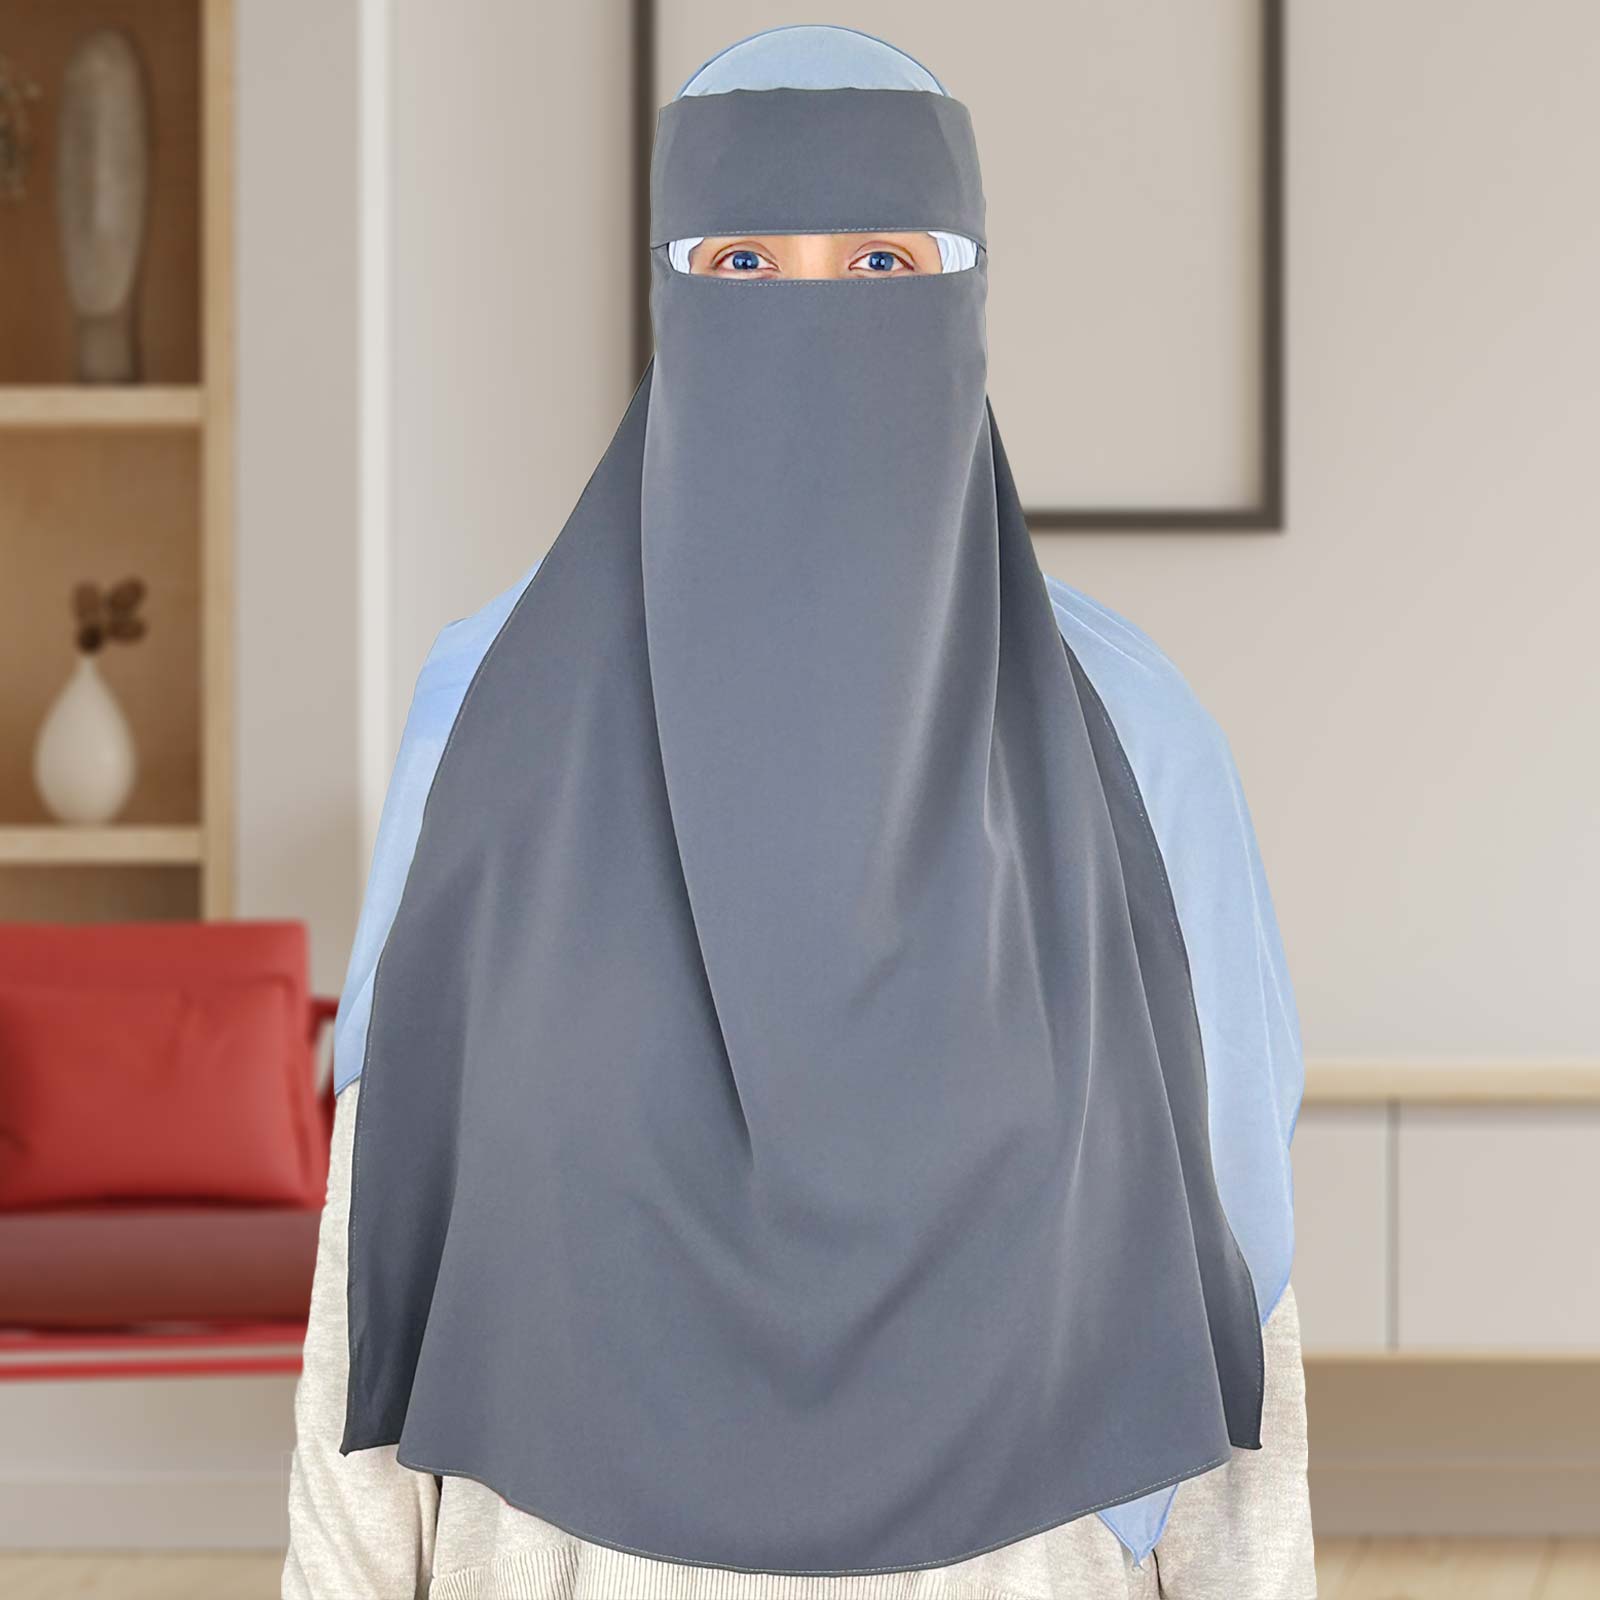 non-see-through gray niqab, perfect for traveling and events, available at Syeeds Boutique